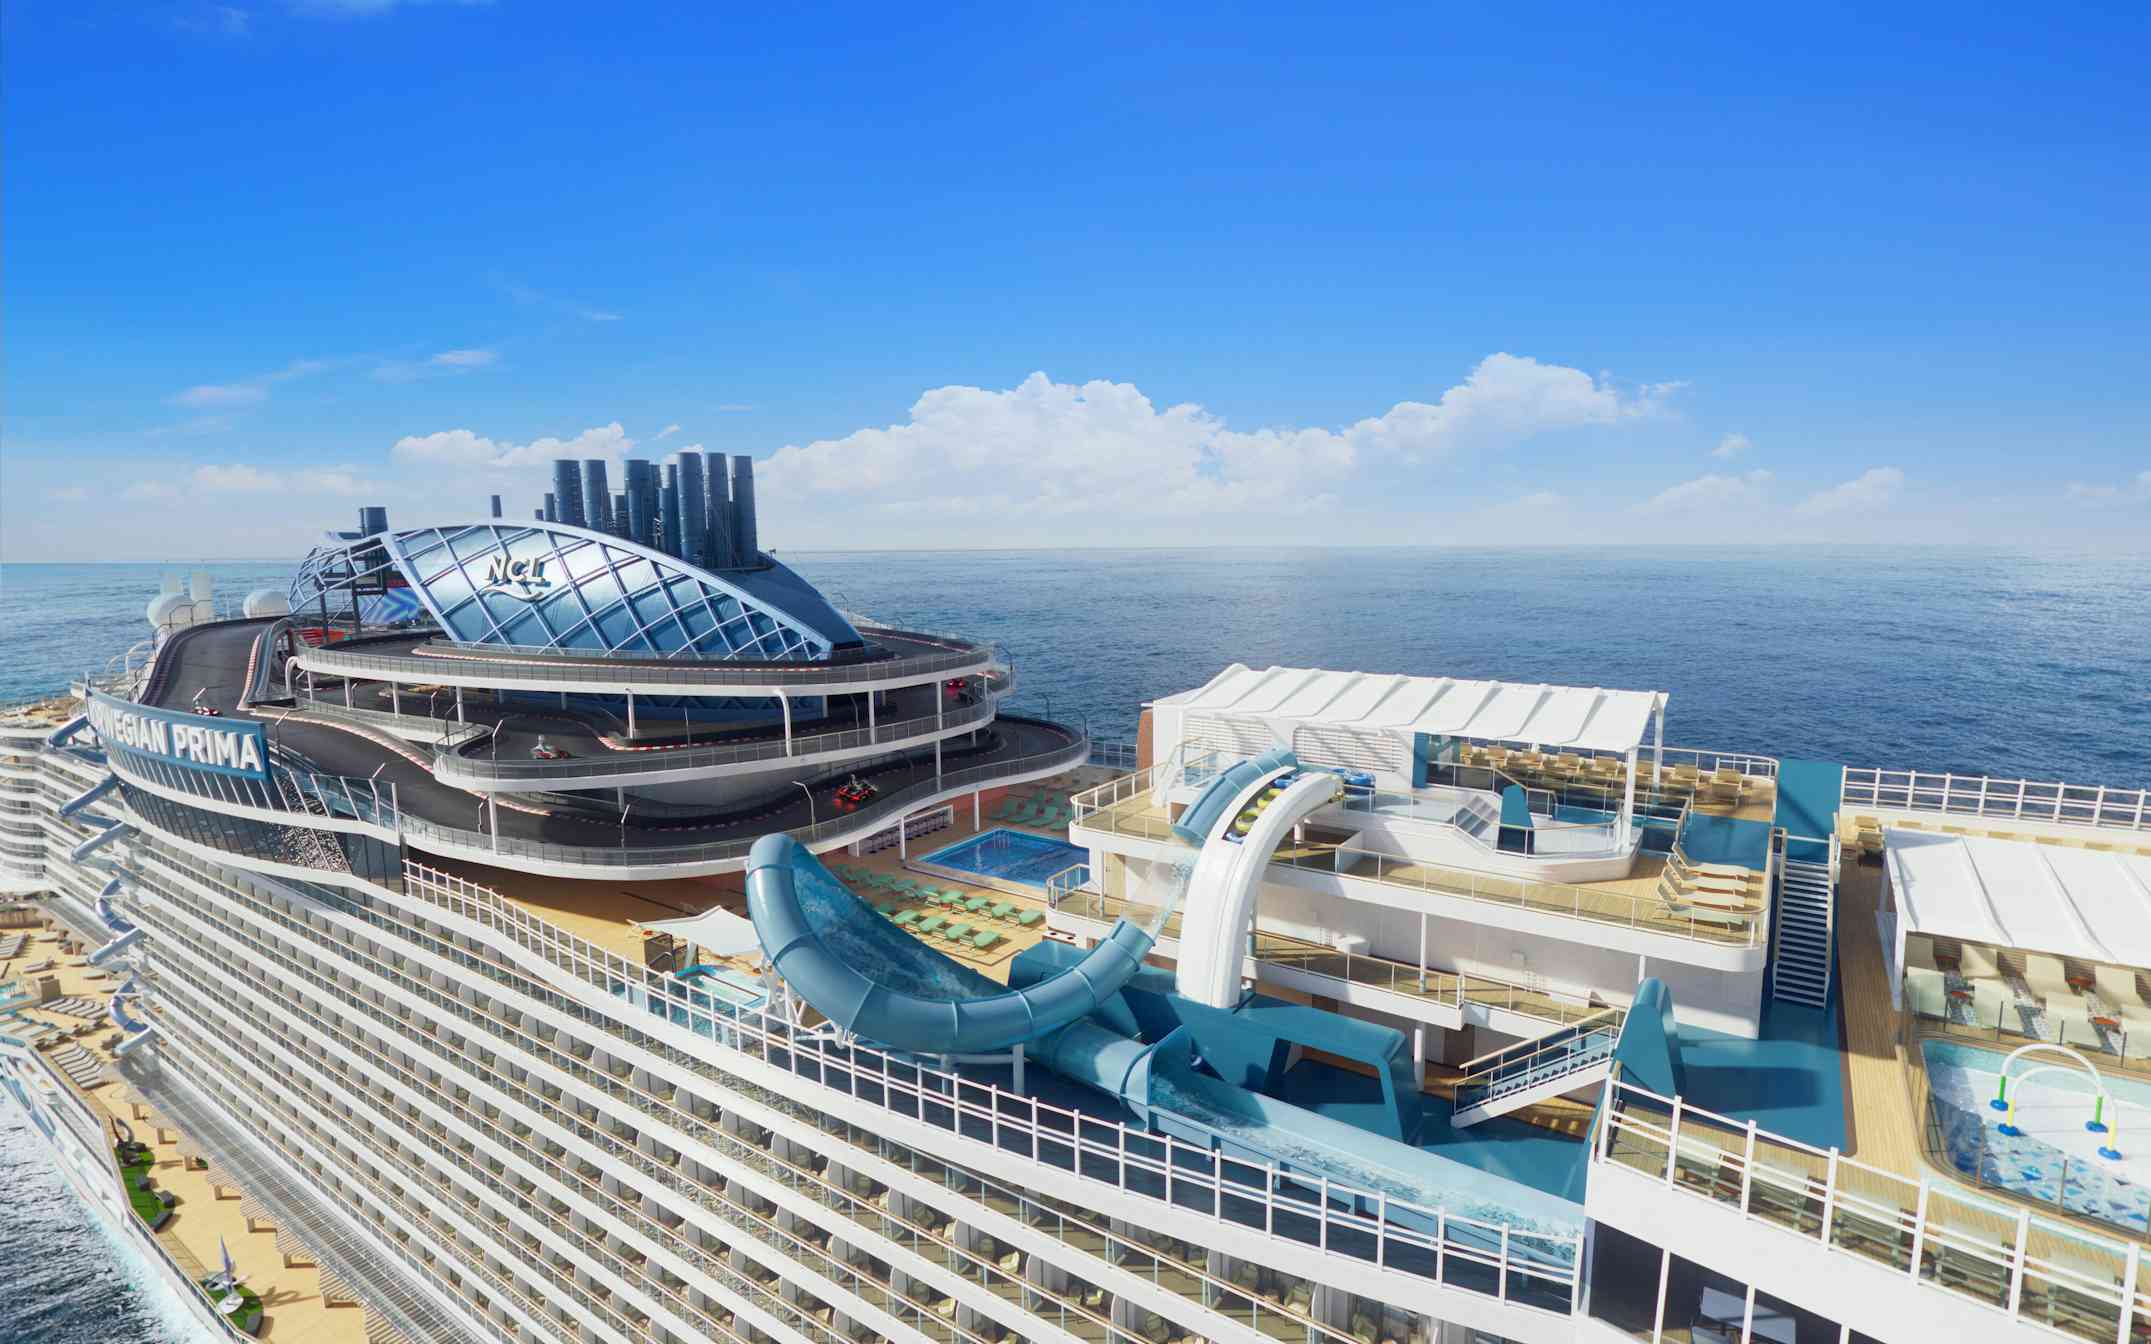 How To Get Upgrade On Norwegian Cruise Lines